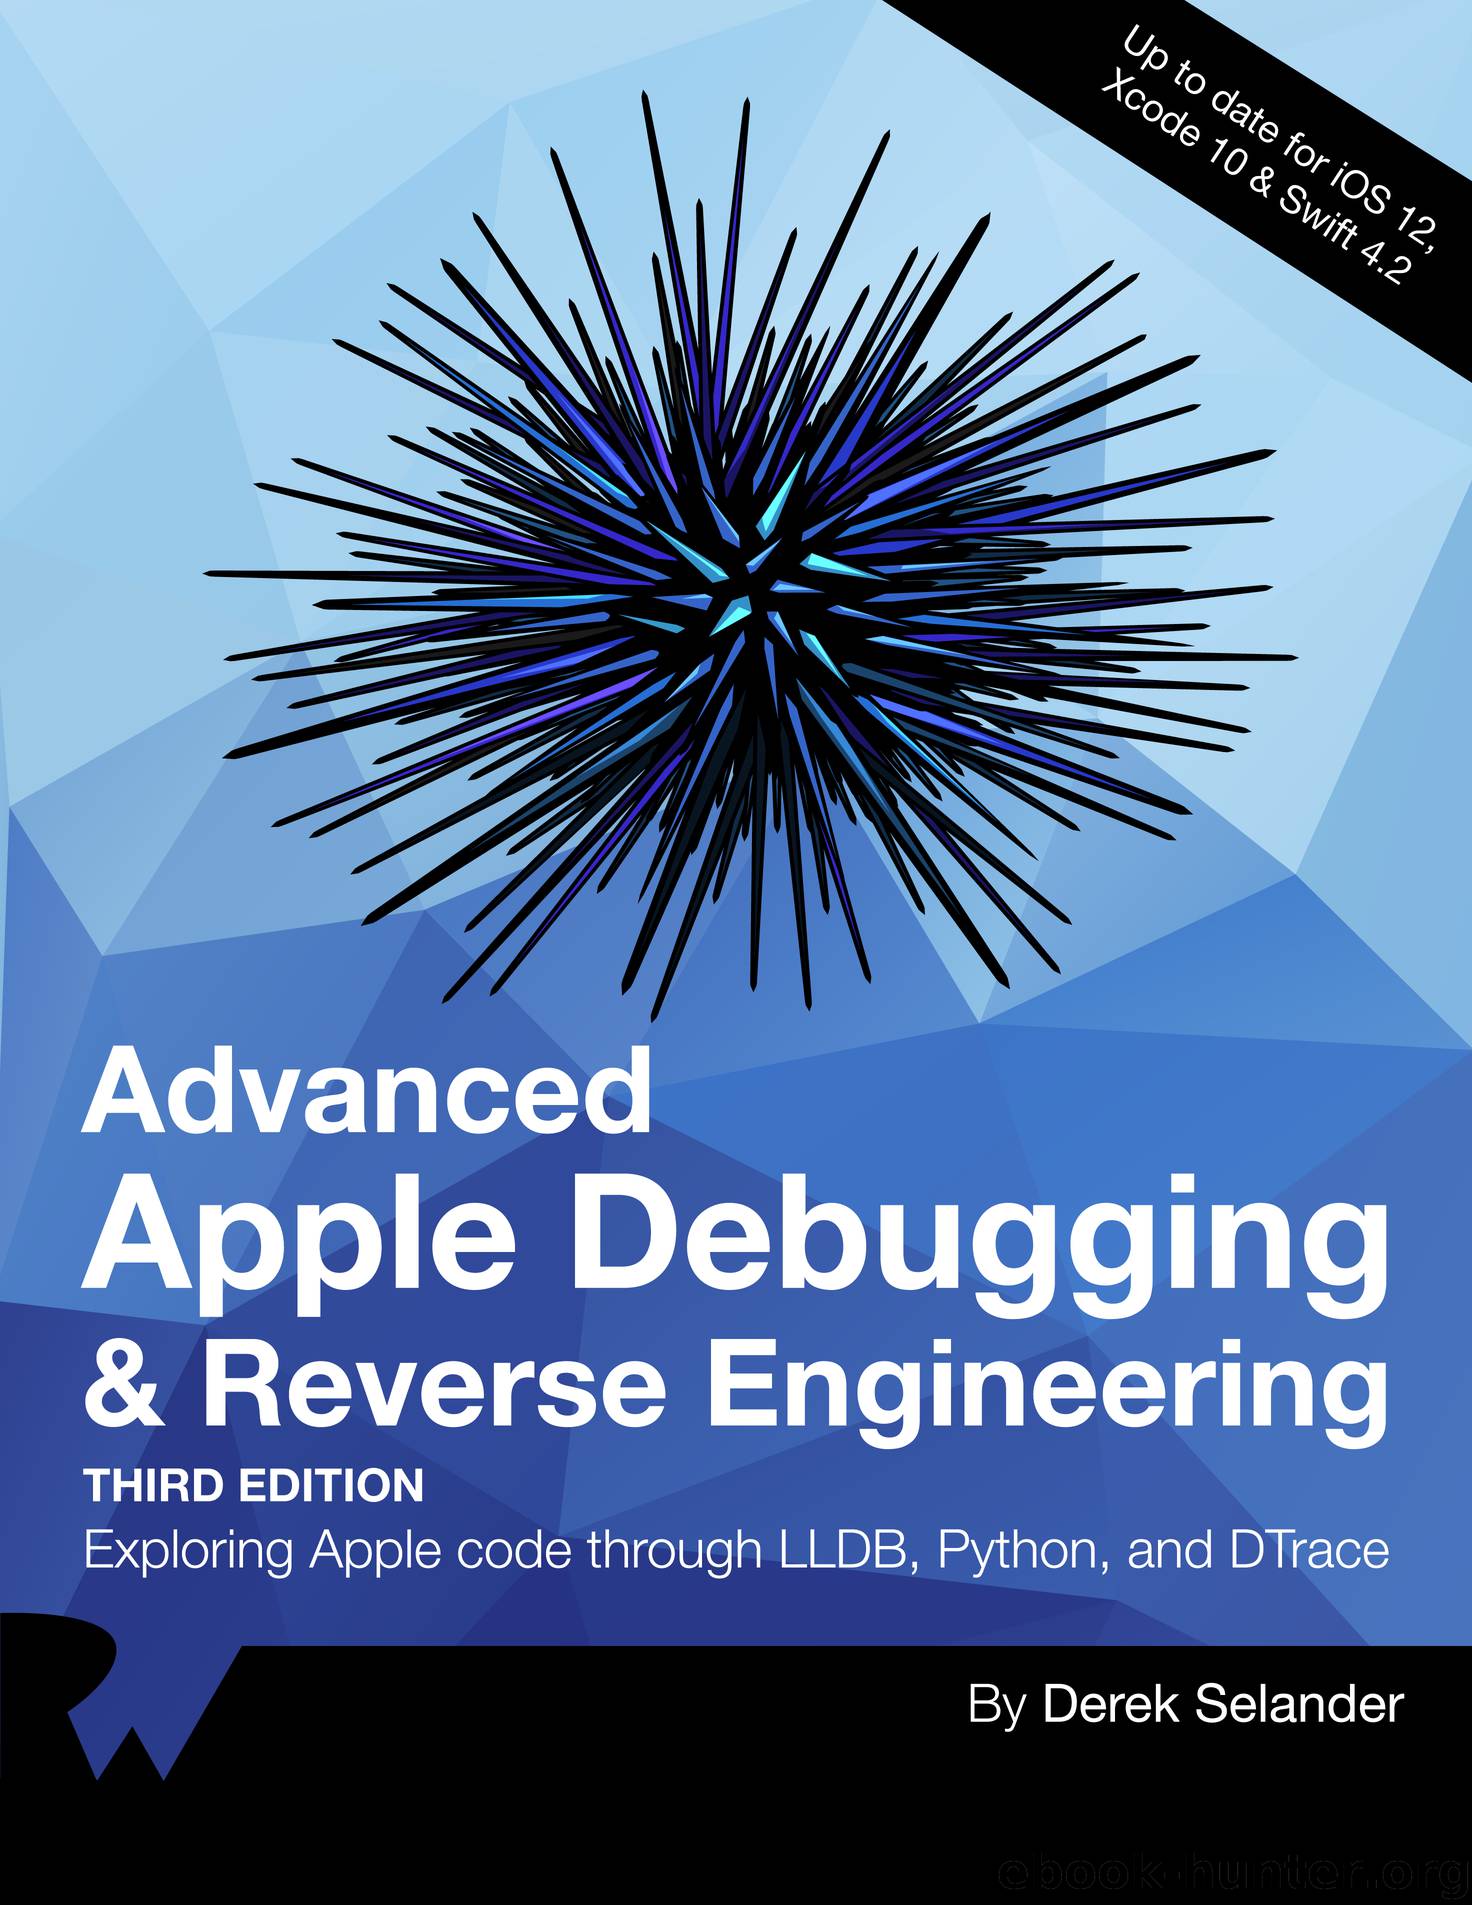 Advanced Apple Debugging by 2018